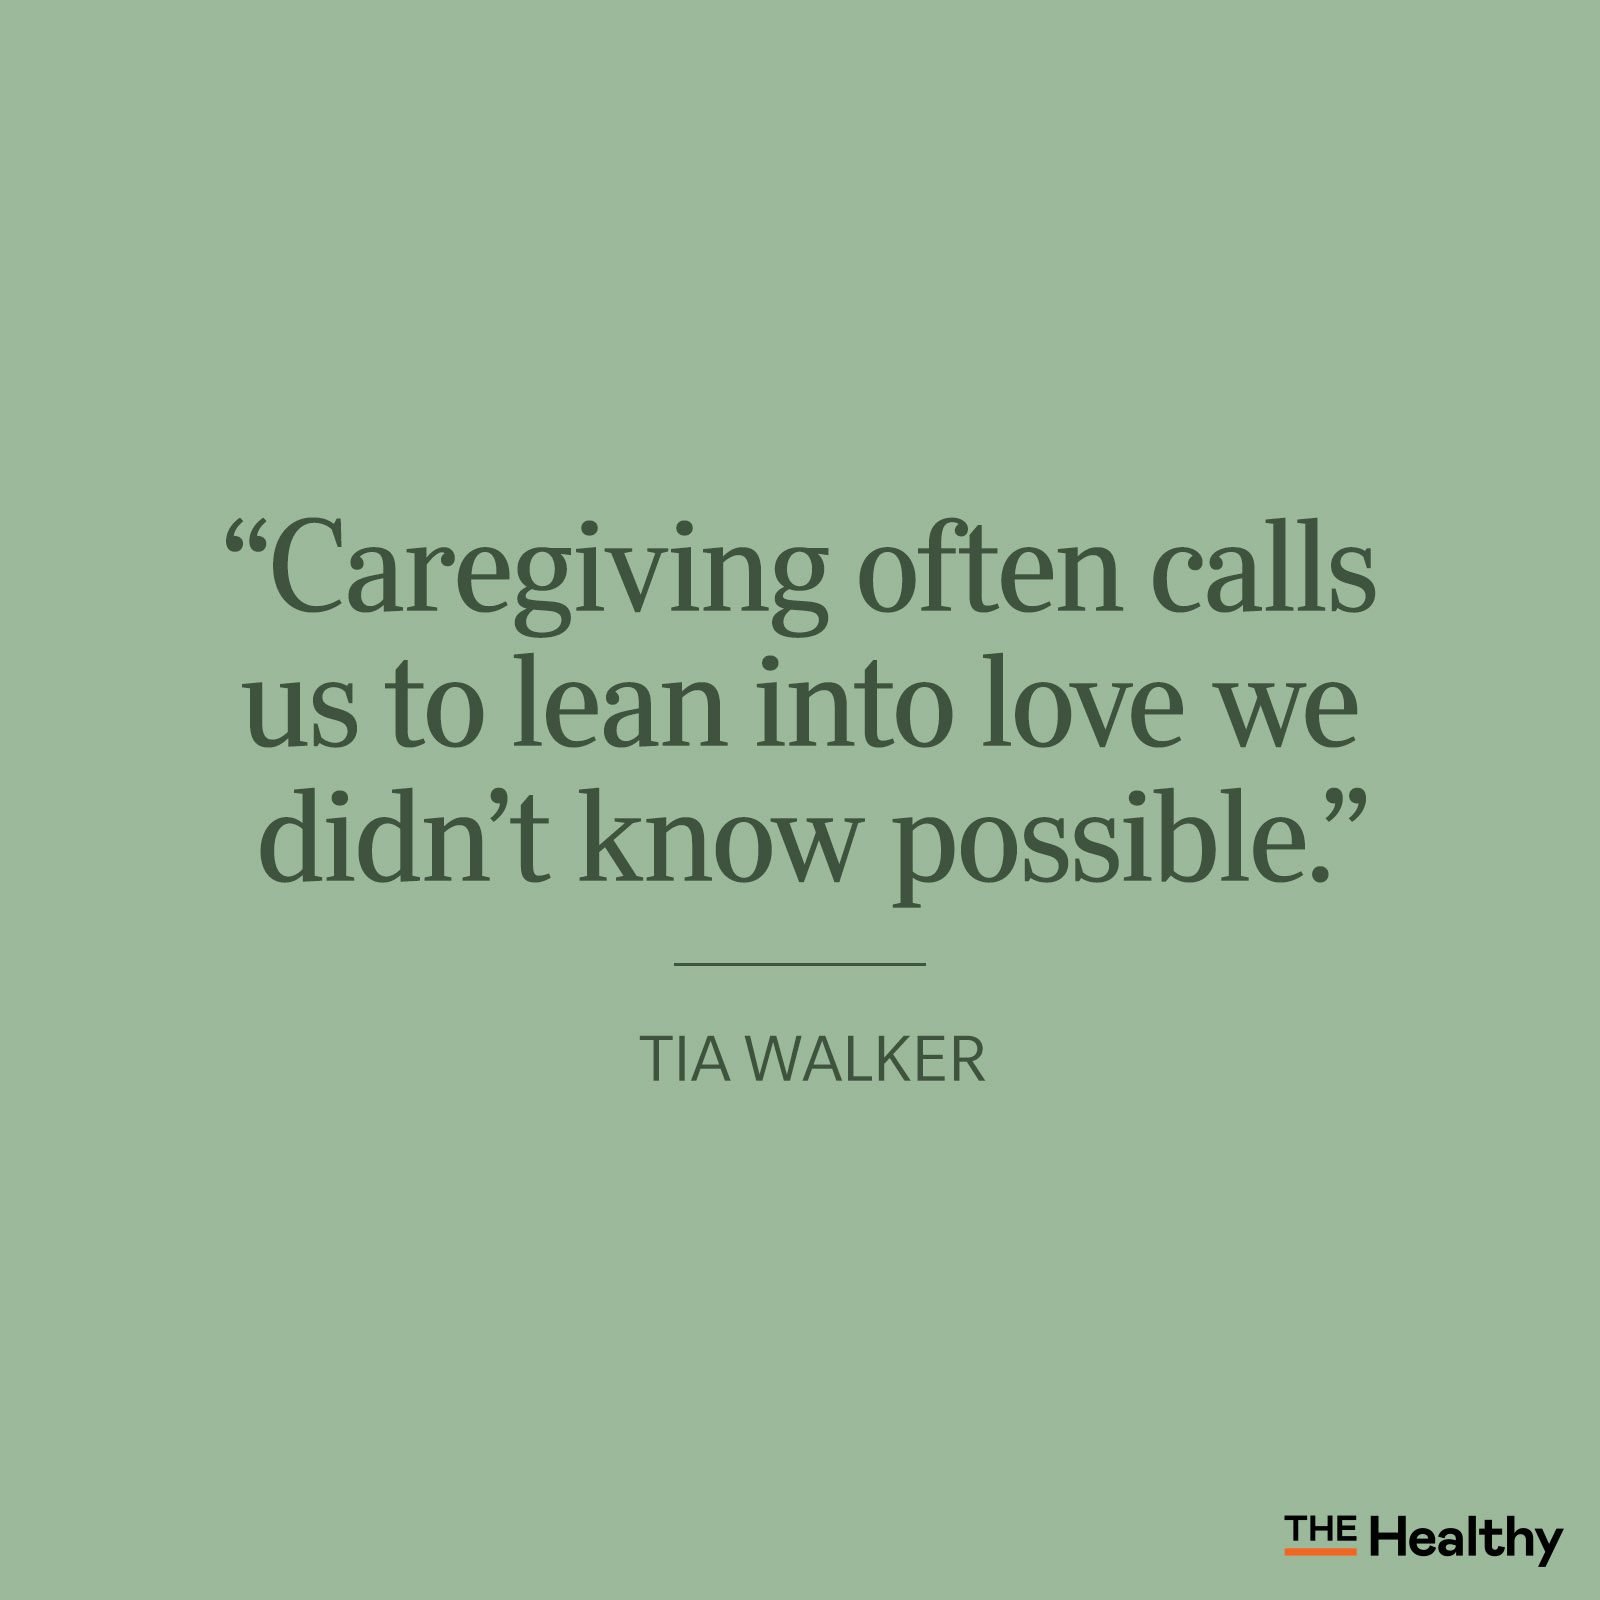 Caregiver Quotes 16 Inspiring And Encouraging Quotes The Healthy 8998